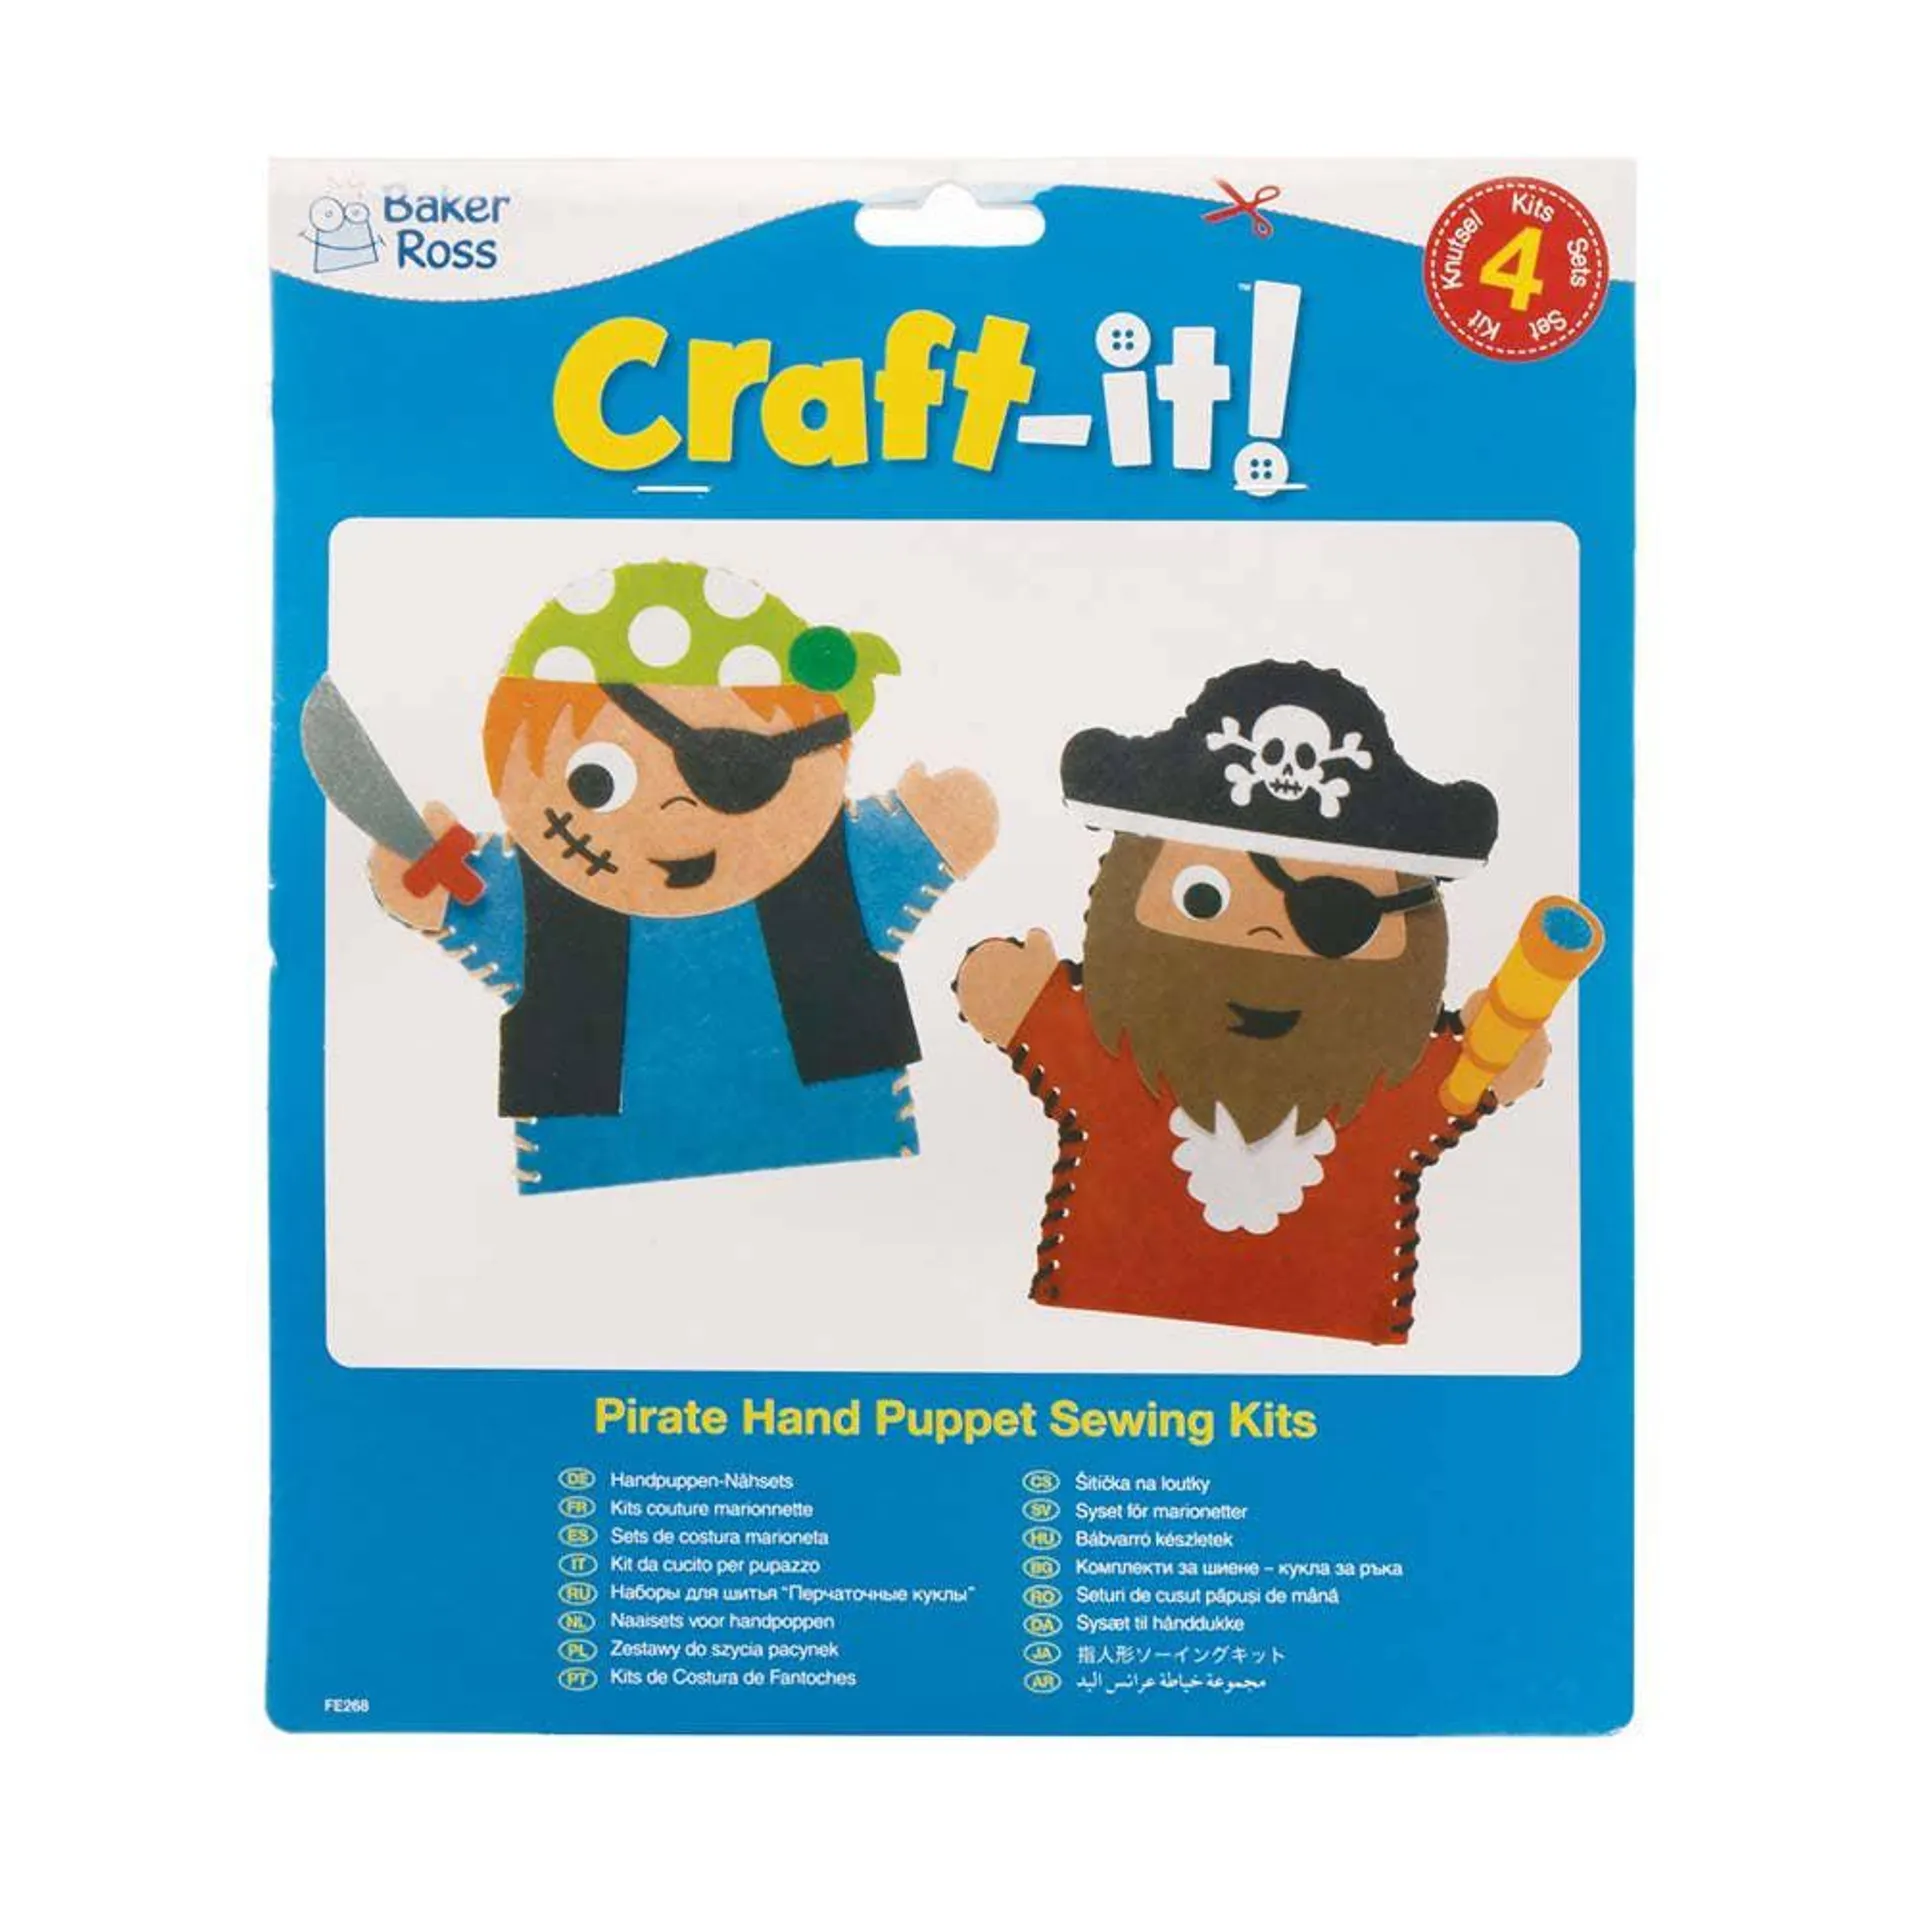 Pirate Hand Puppet Sewing Kits